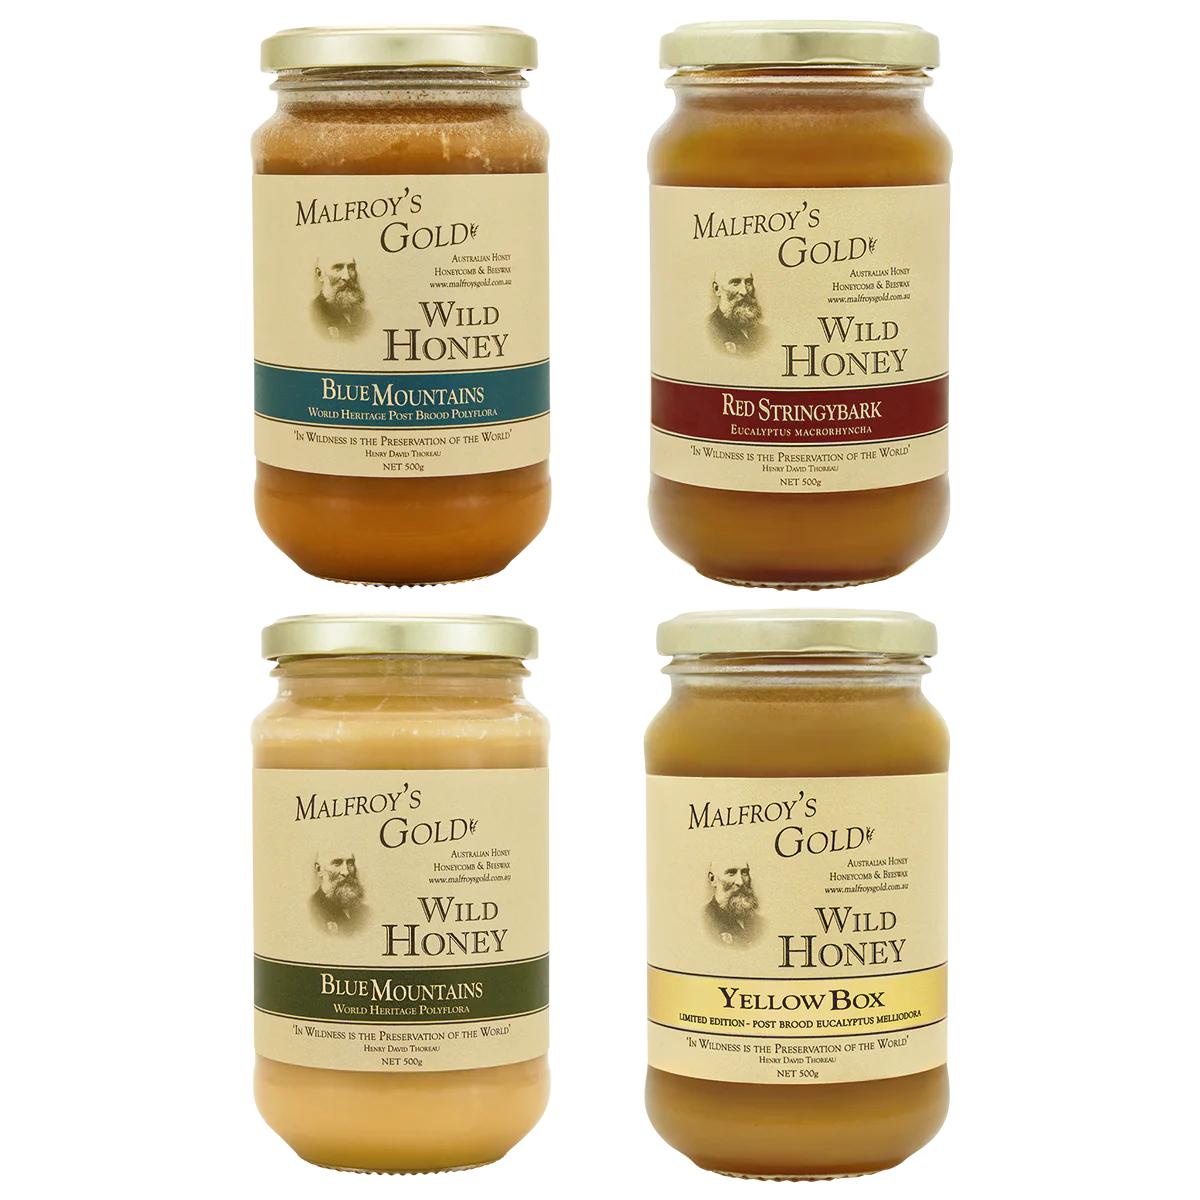 Malfroy's Gold Wild Honey 500g Mixed Variety 4 Pack